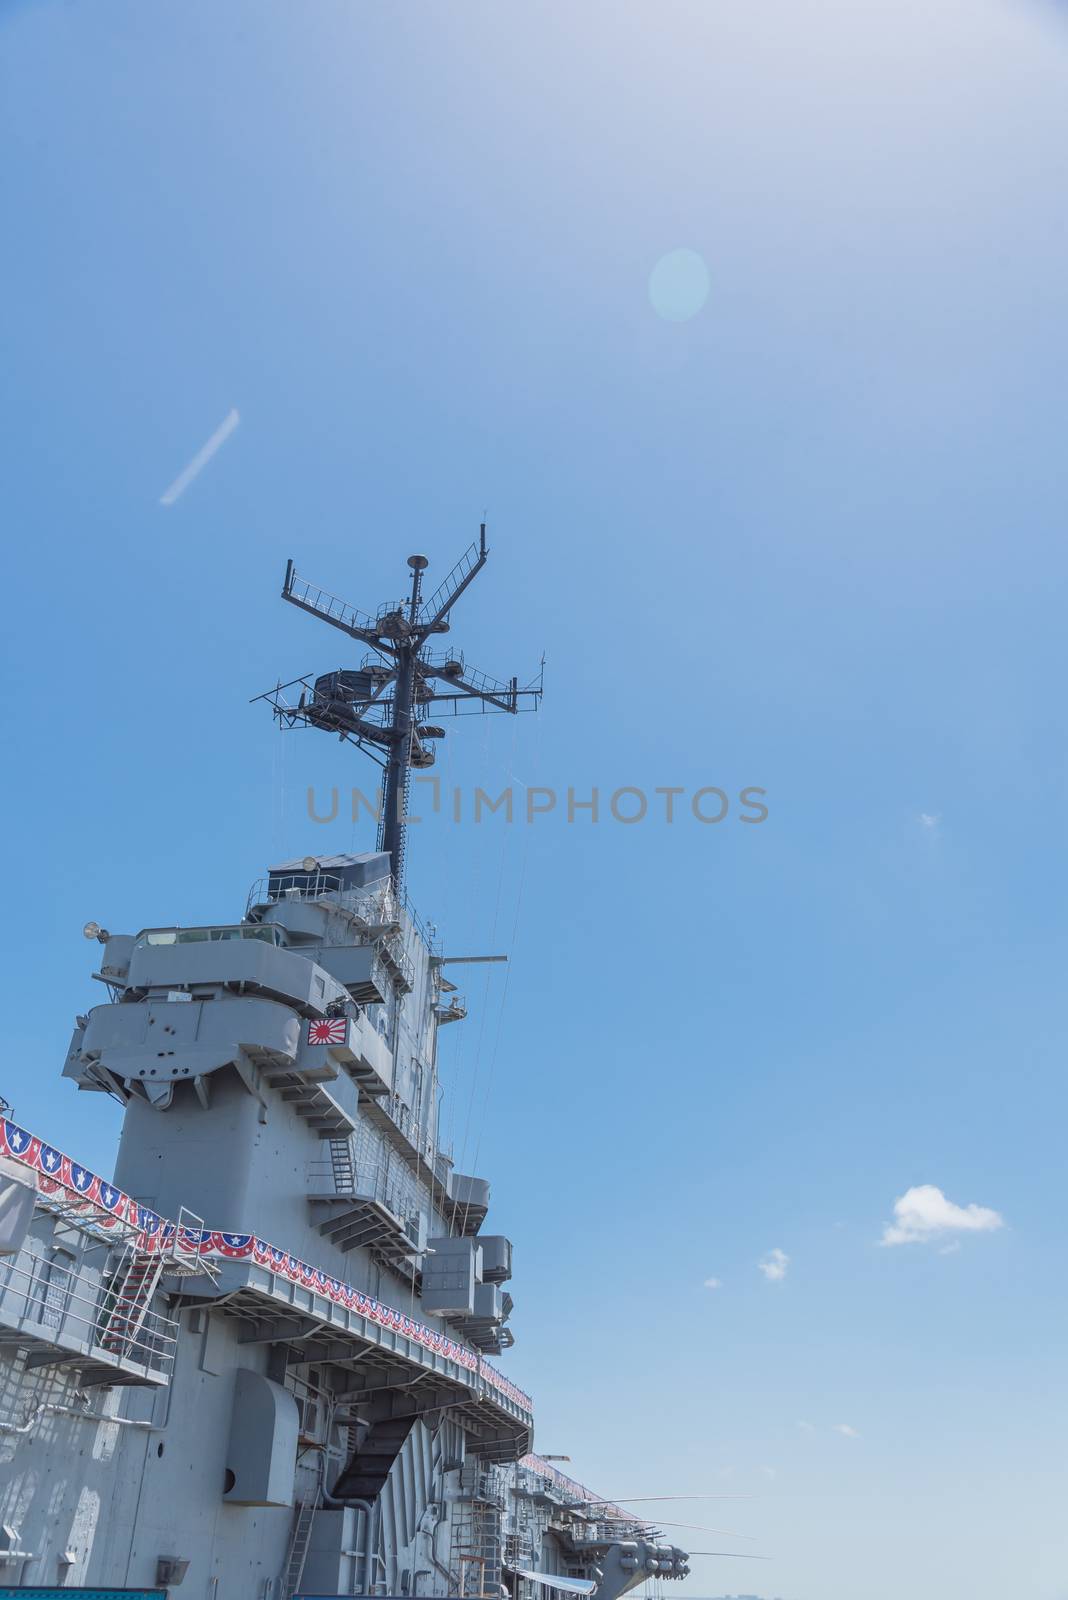 Close-up view top of typical American aircraft carrier